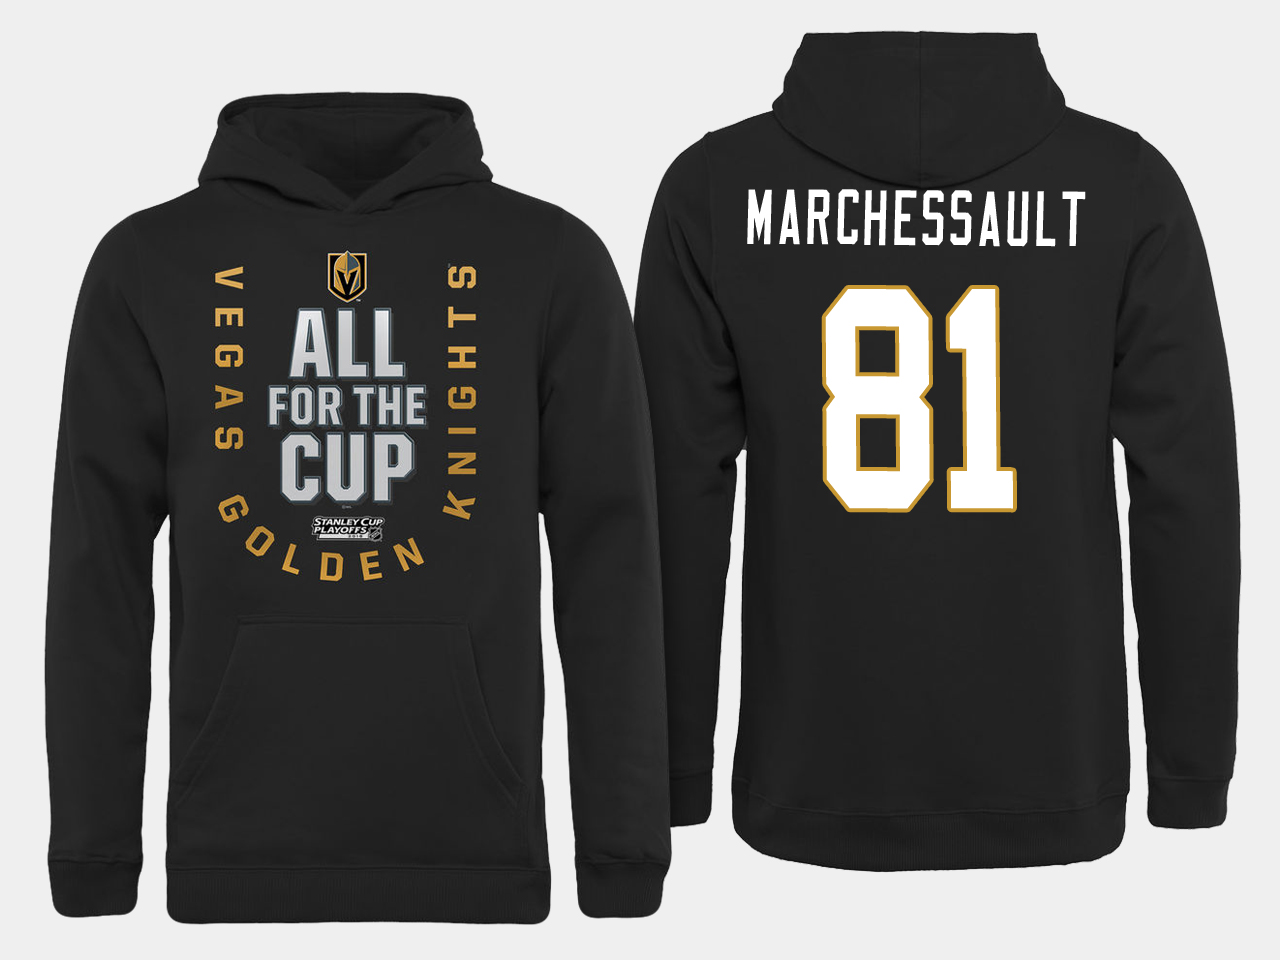 Men NHL Vegas Golden Knights #81 Marchessault All for the Cup hoodie->more nhl jerseys->NHL Jersey